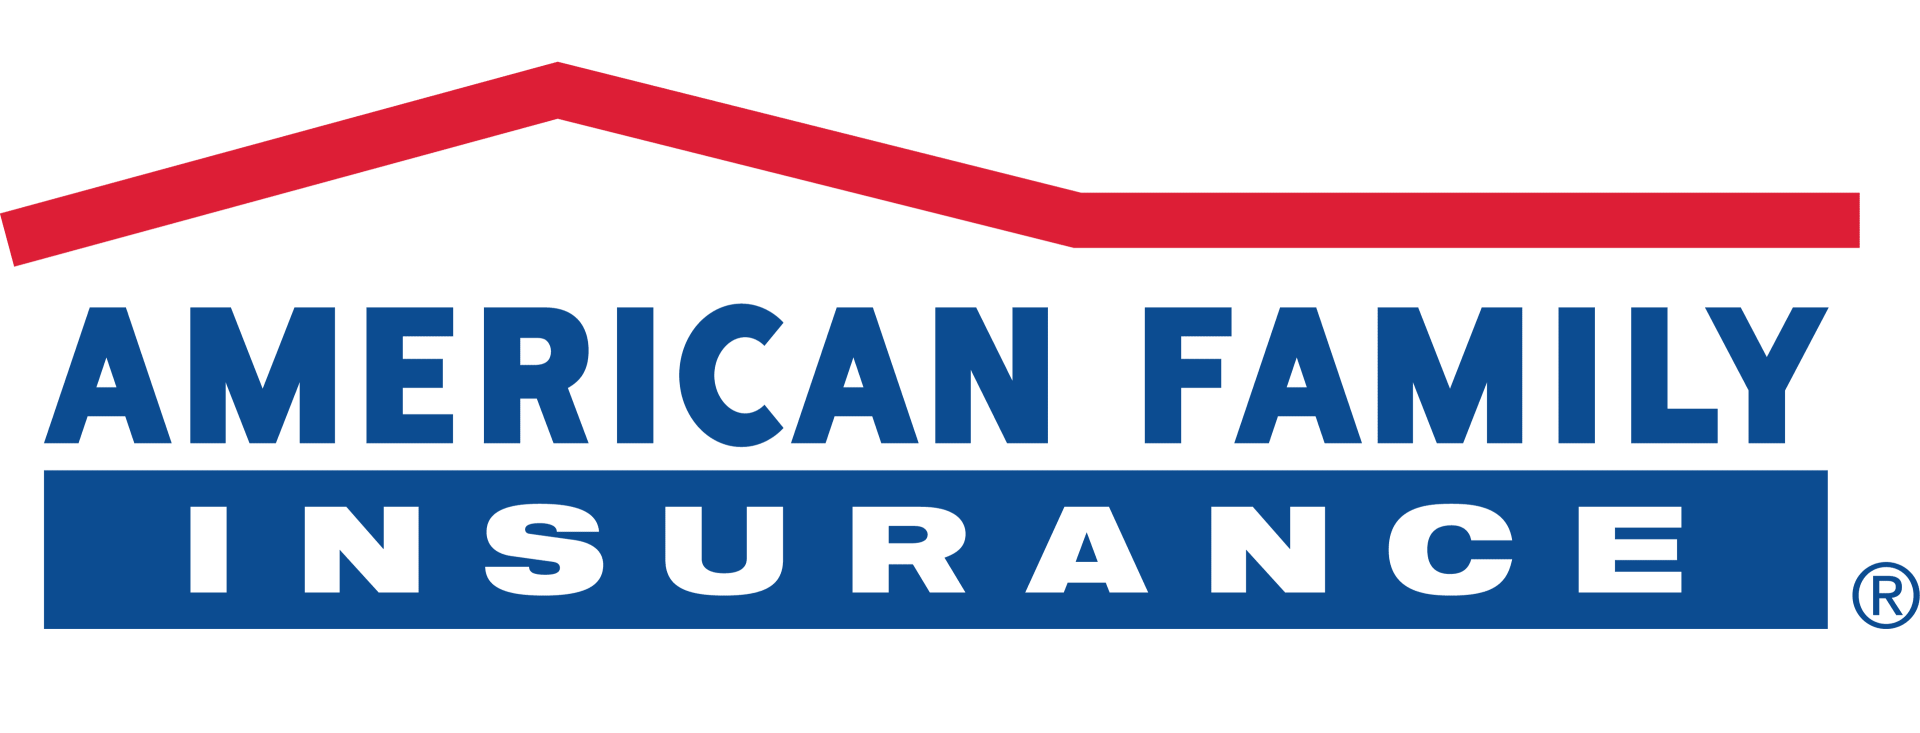 American Family Insurance logo. Sycamore Chamber of Commerce.